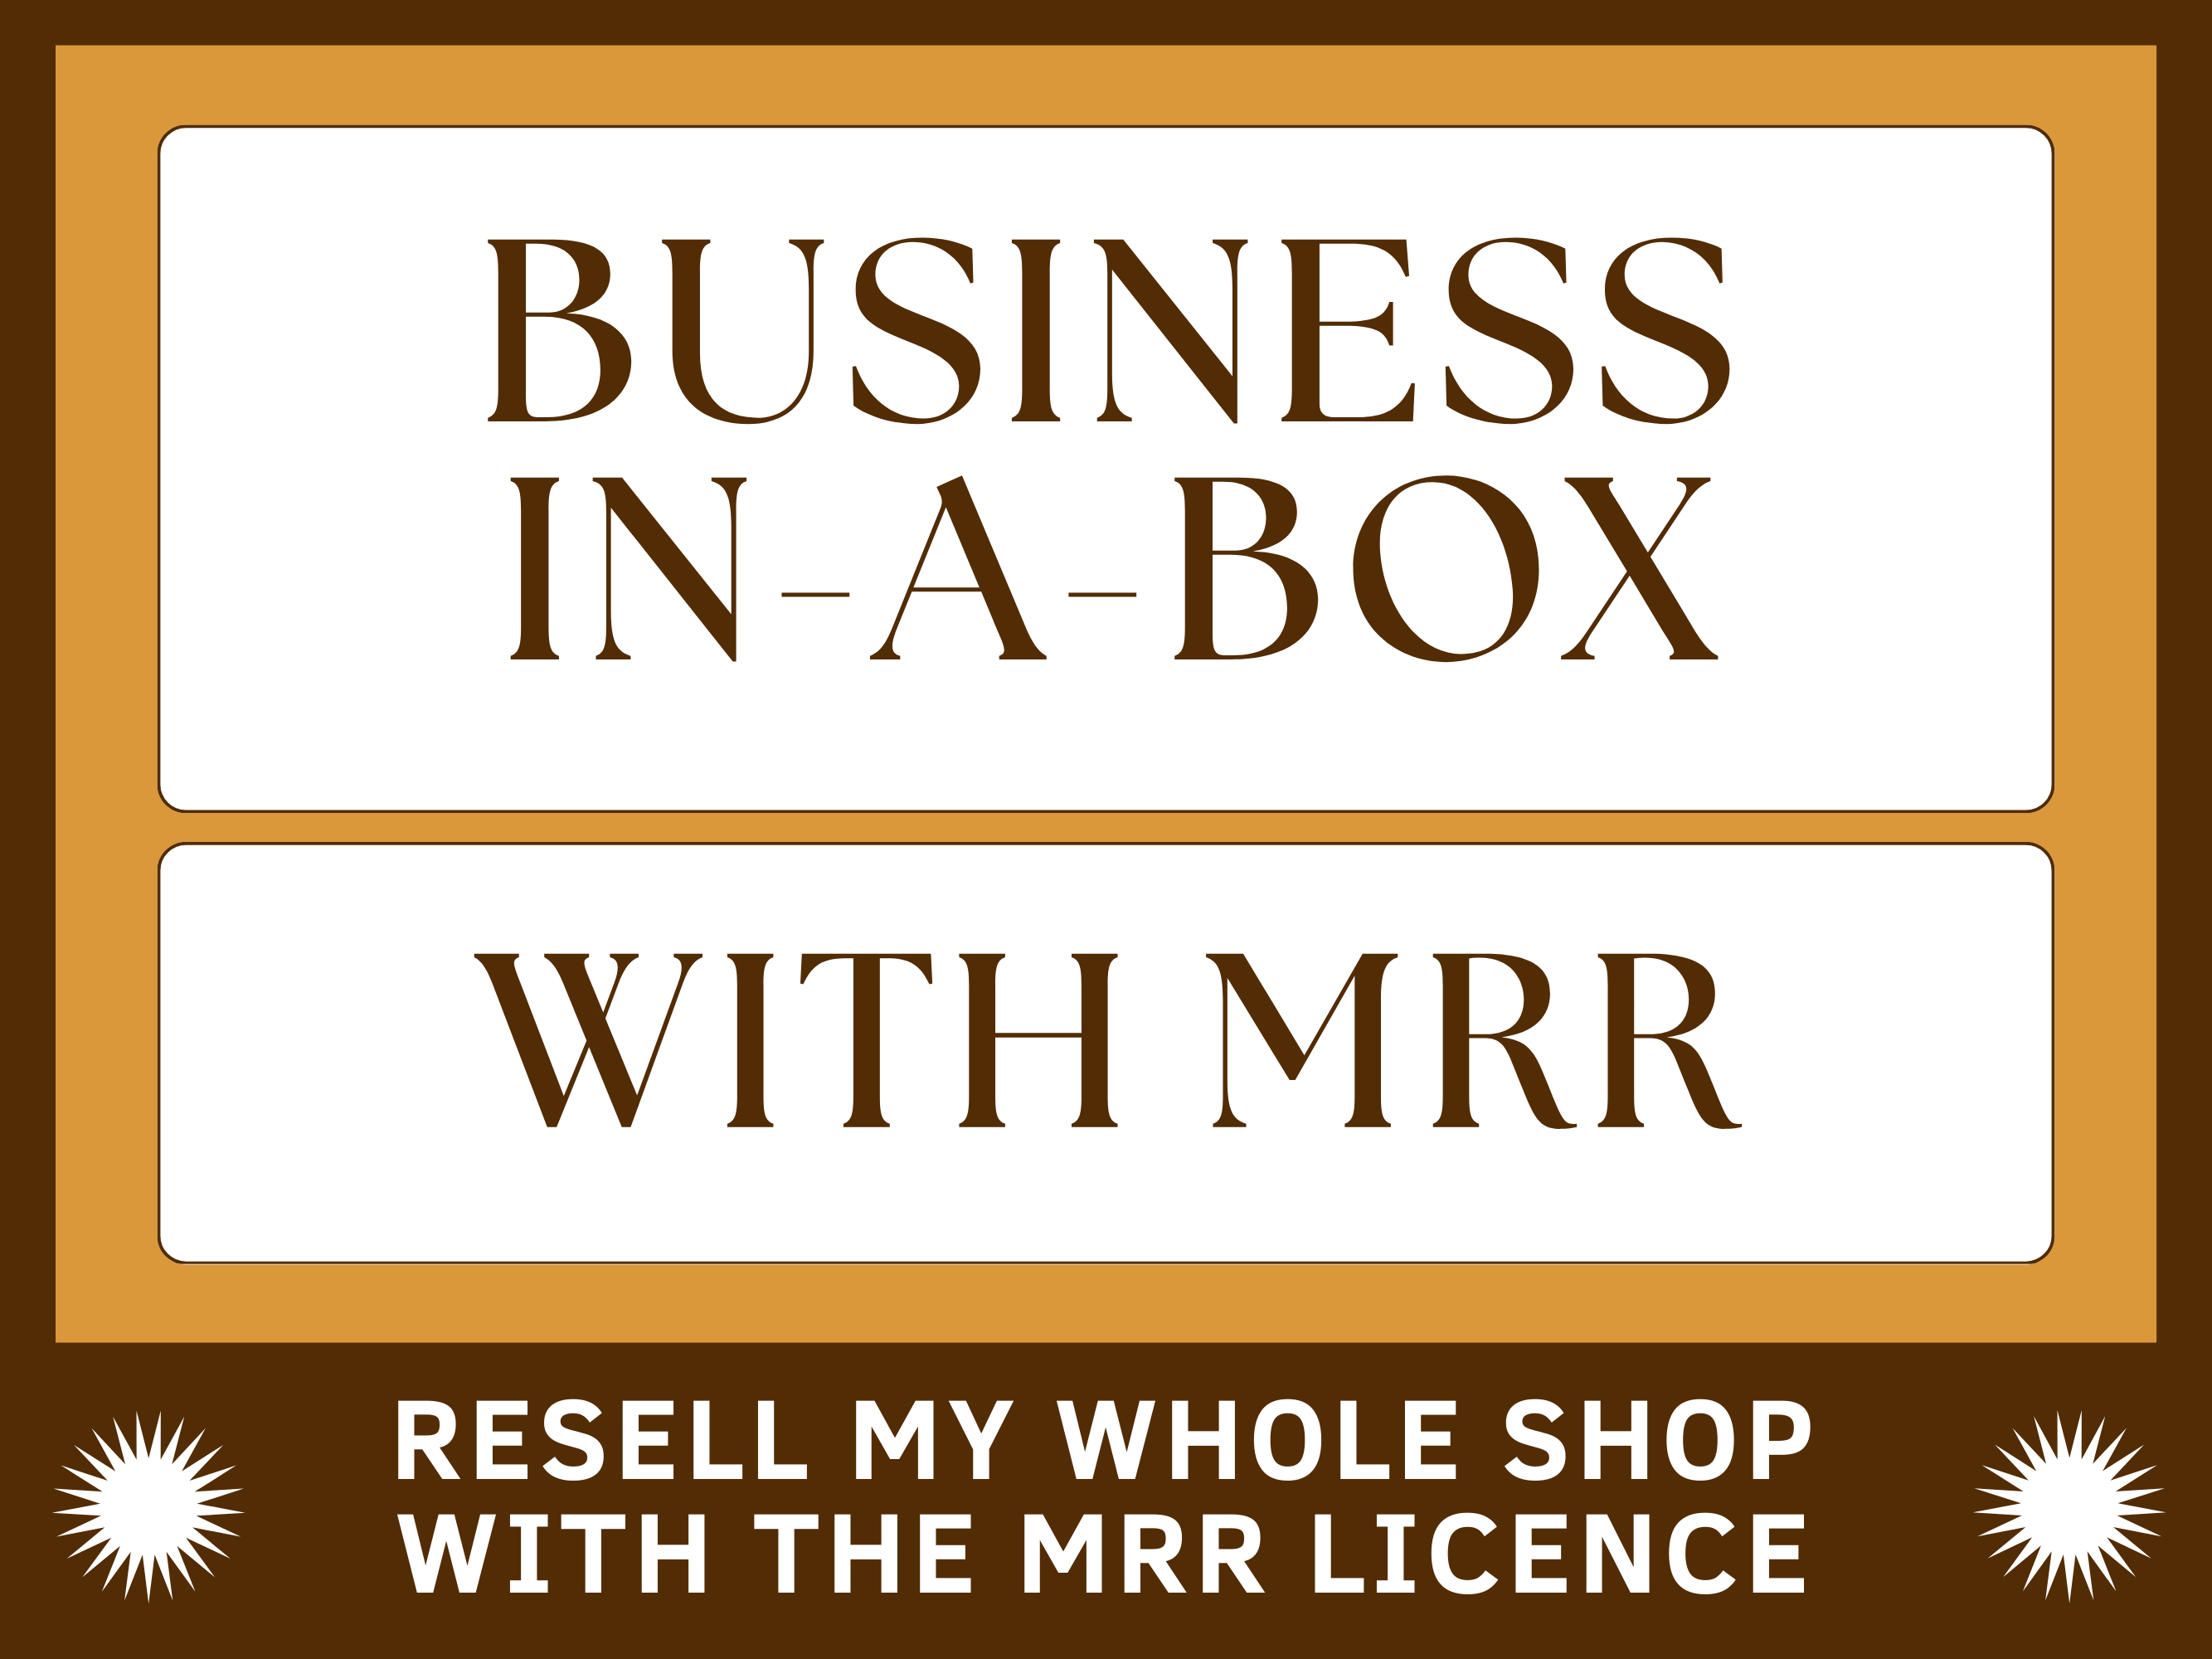 Digital Product Business-in-a-Box with MRR